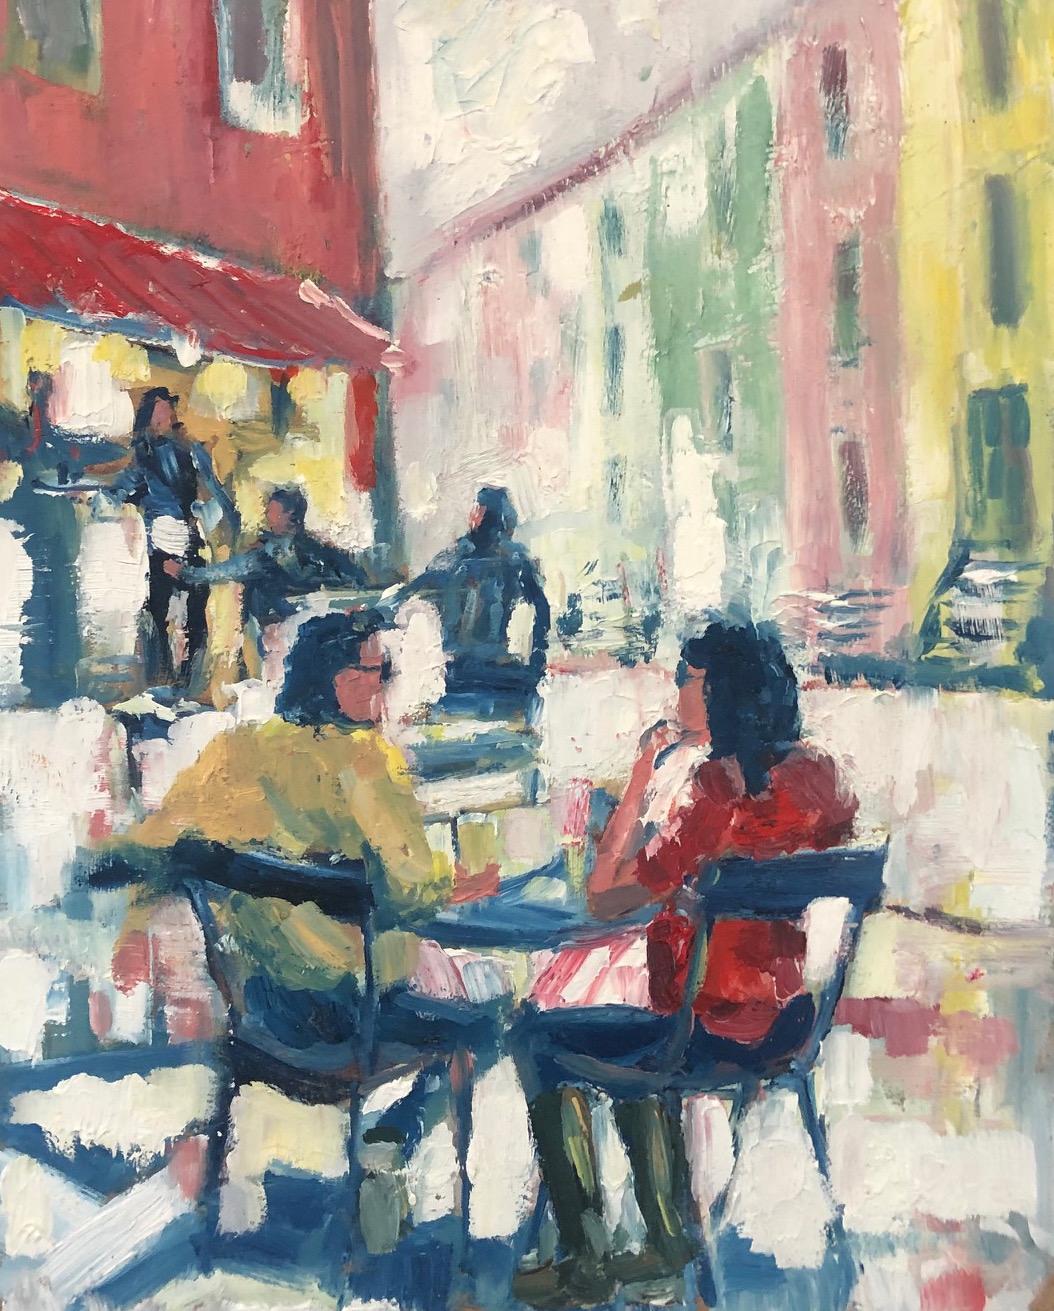 Richard Gower Figurative Painting - Cafe Society - contemporary cityscape Art Original figurative cityscape painting